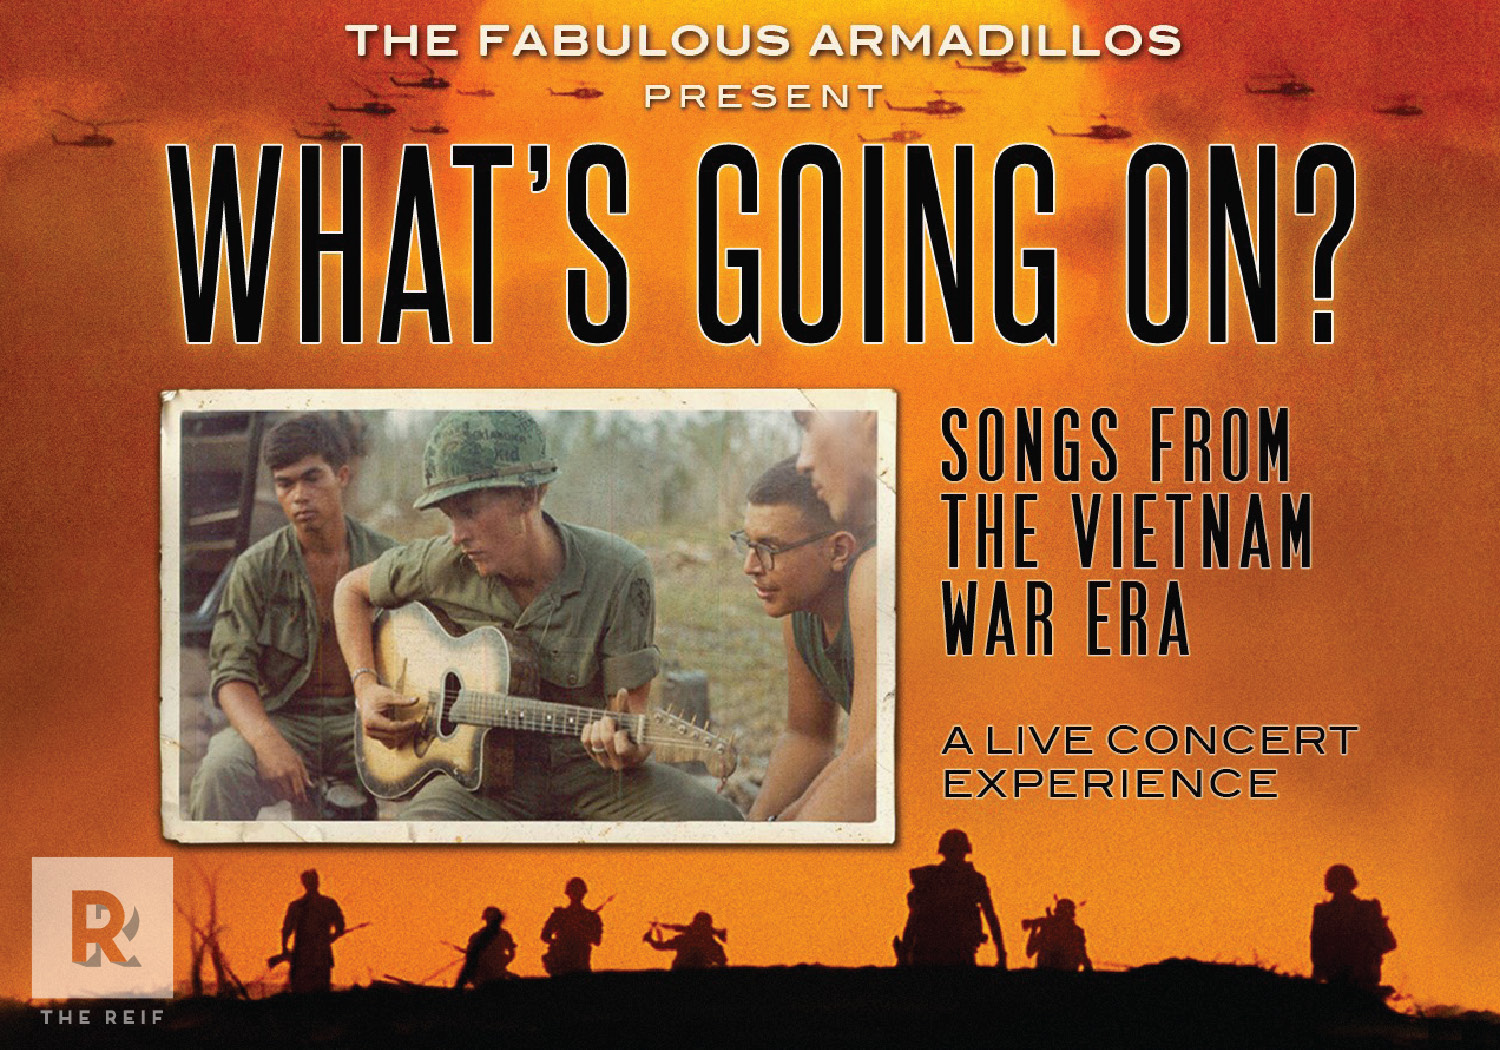 THE FABULOUS ARMADILLOS: What’s Going On: Songs From The Vietnam War Era